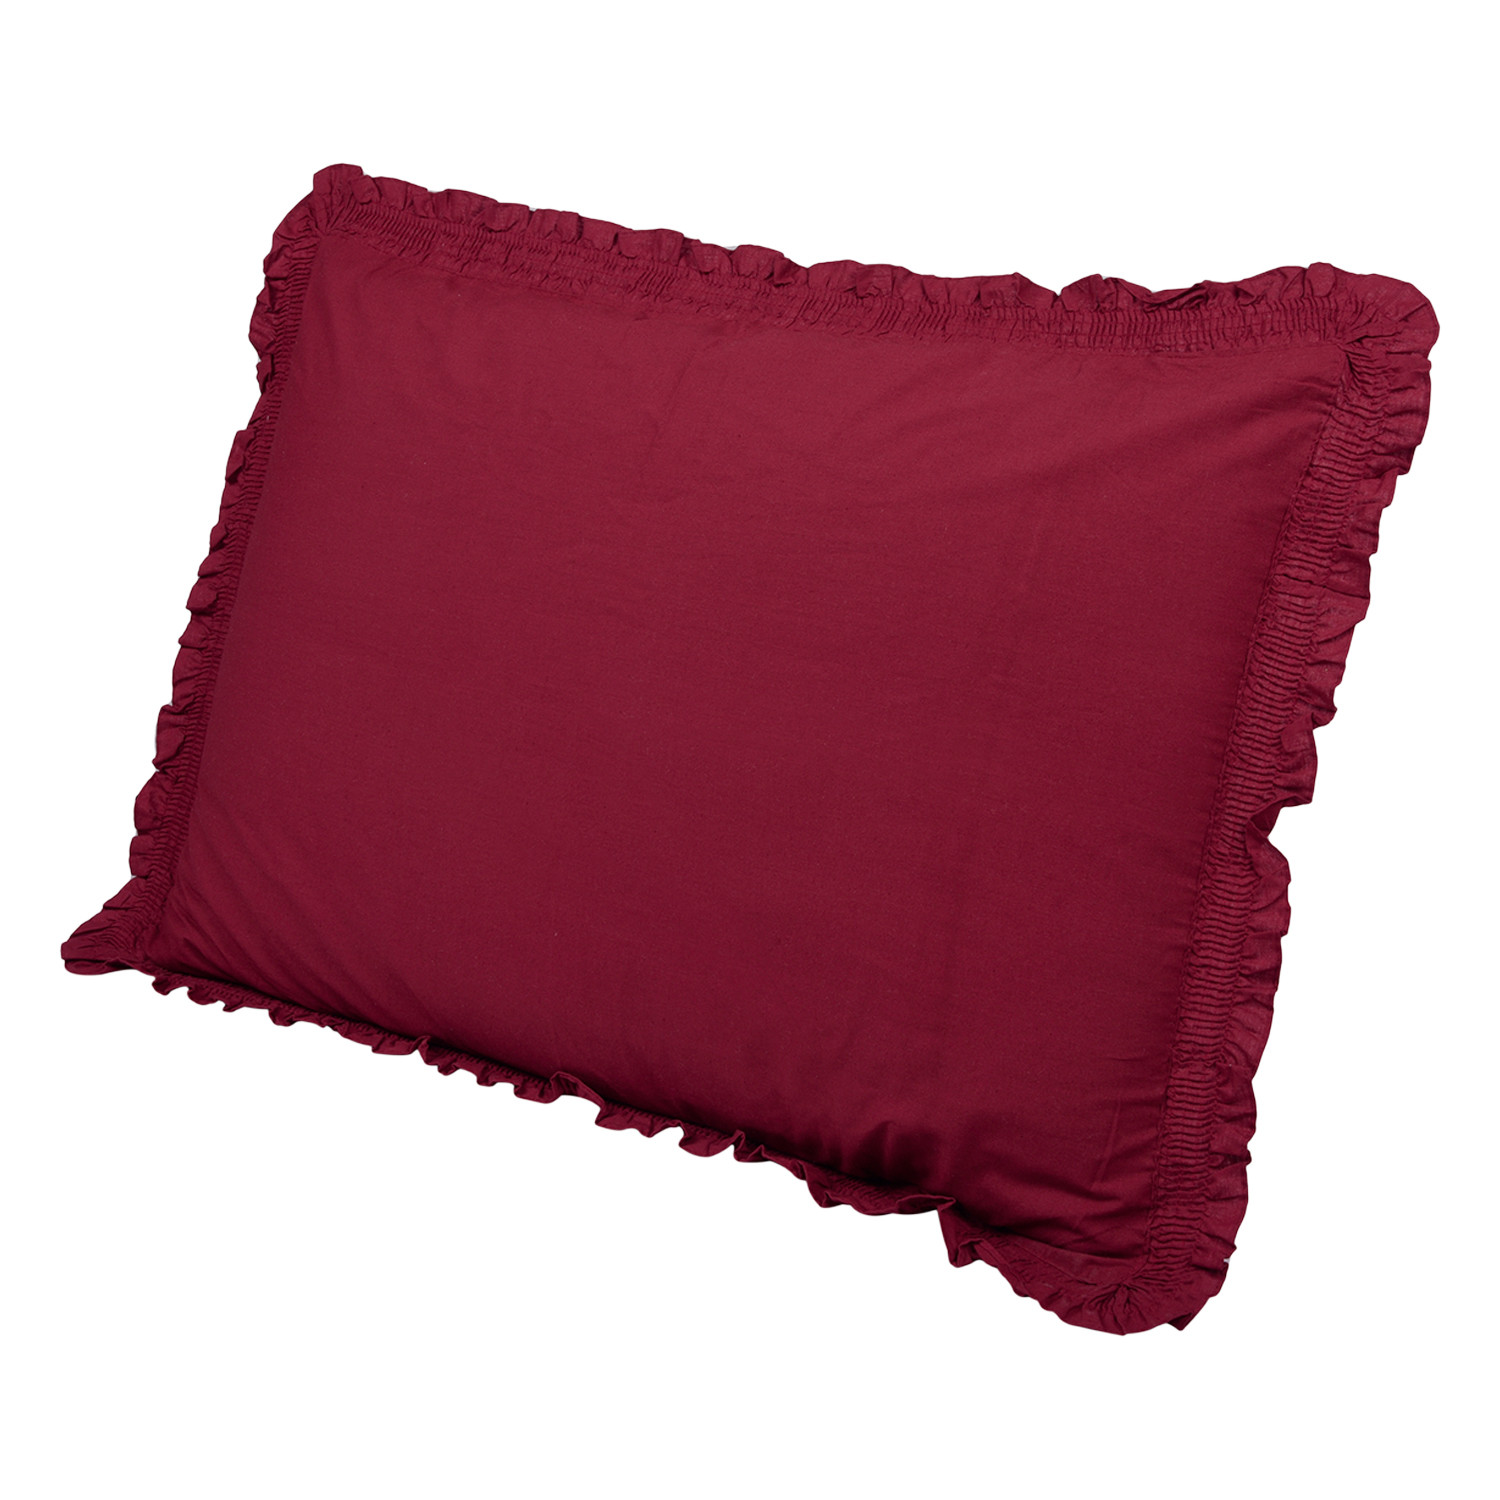 Kuber Industries Pillow Cover | Cotton Pillow Cover | Pillow Cover For Bedroom | Pleated Frill Border Long Crush Pillow Cover | Set of 4 | 20x30 Inch | Maroon